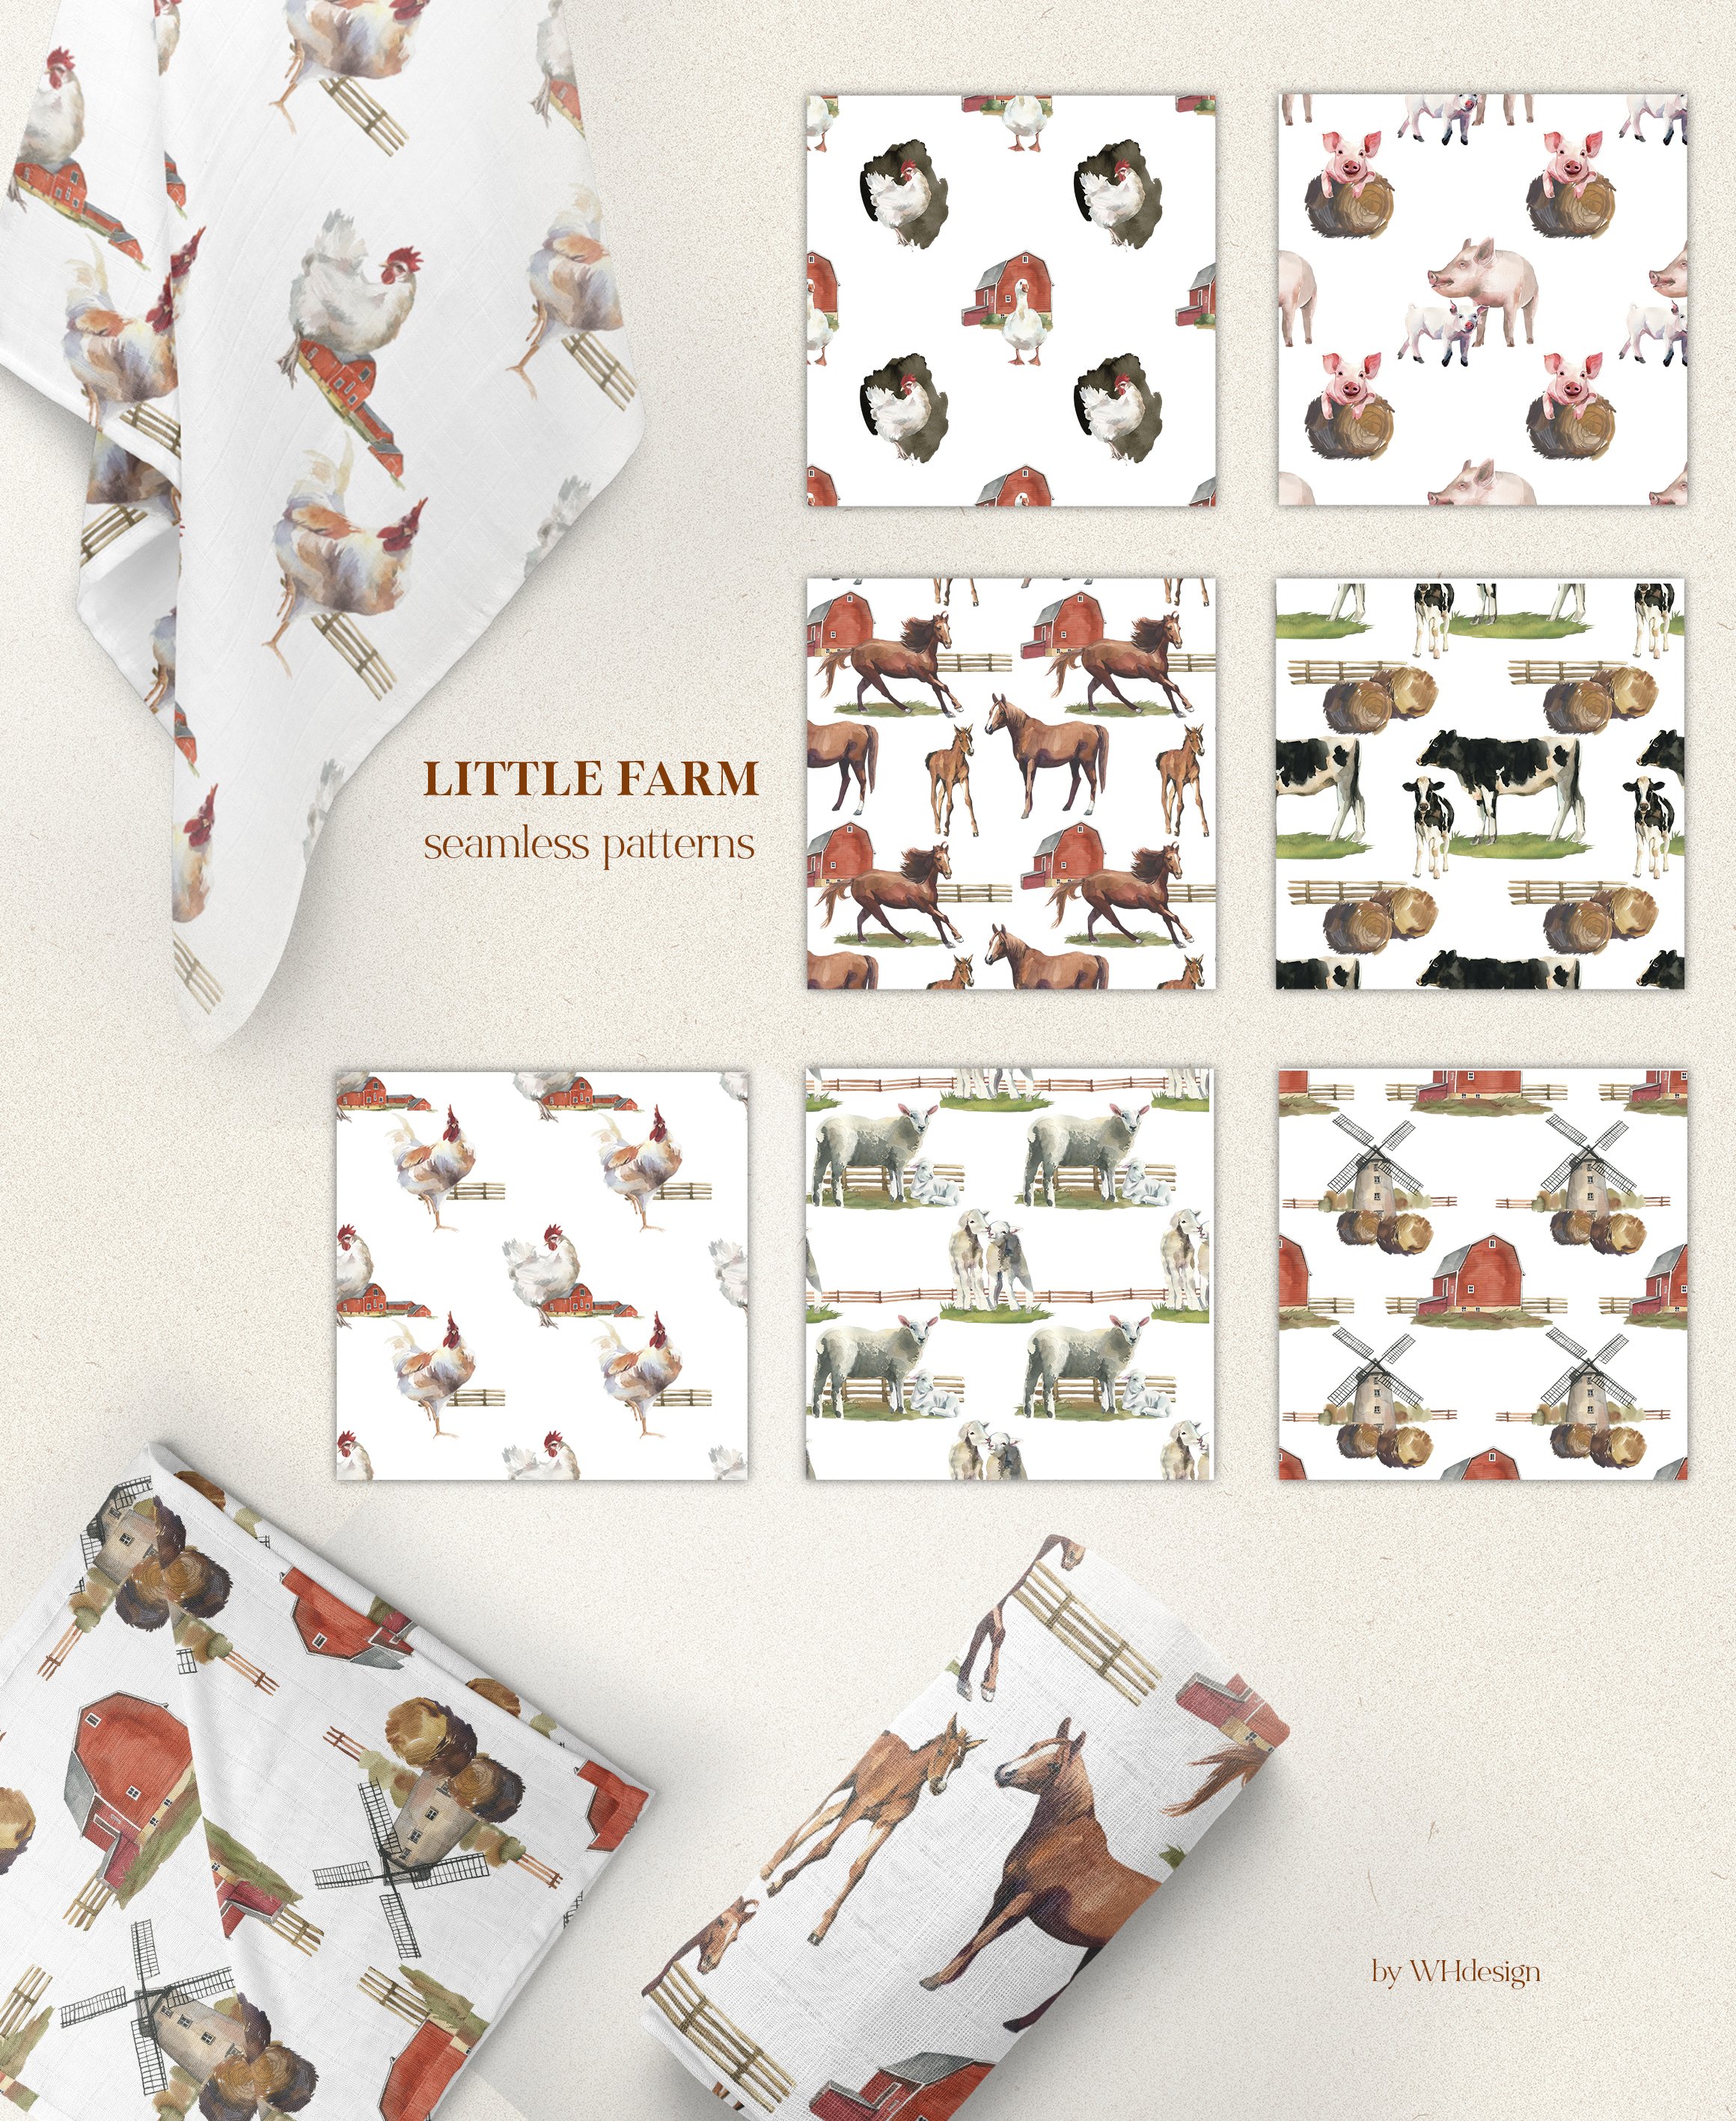 The example of seamless pattern in Little Farm Animals Clipart.